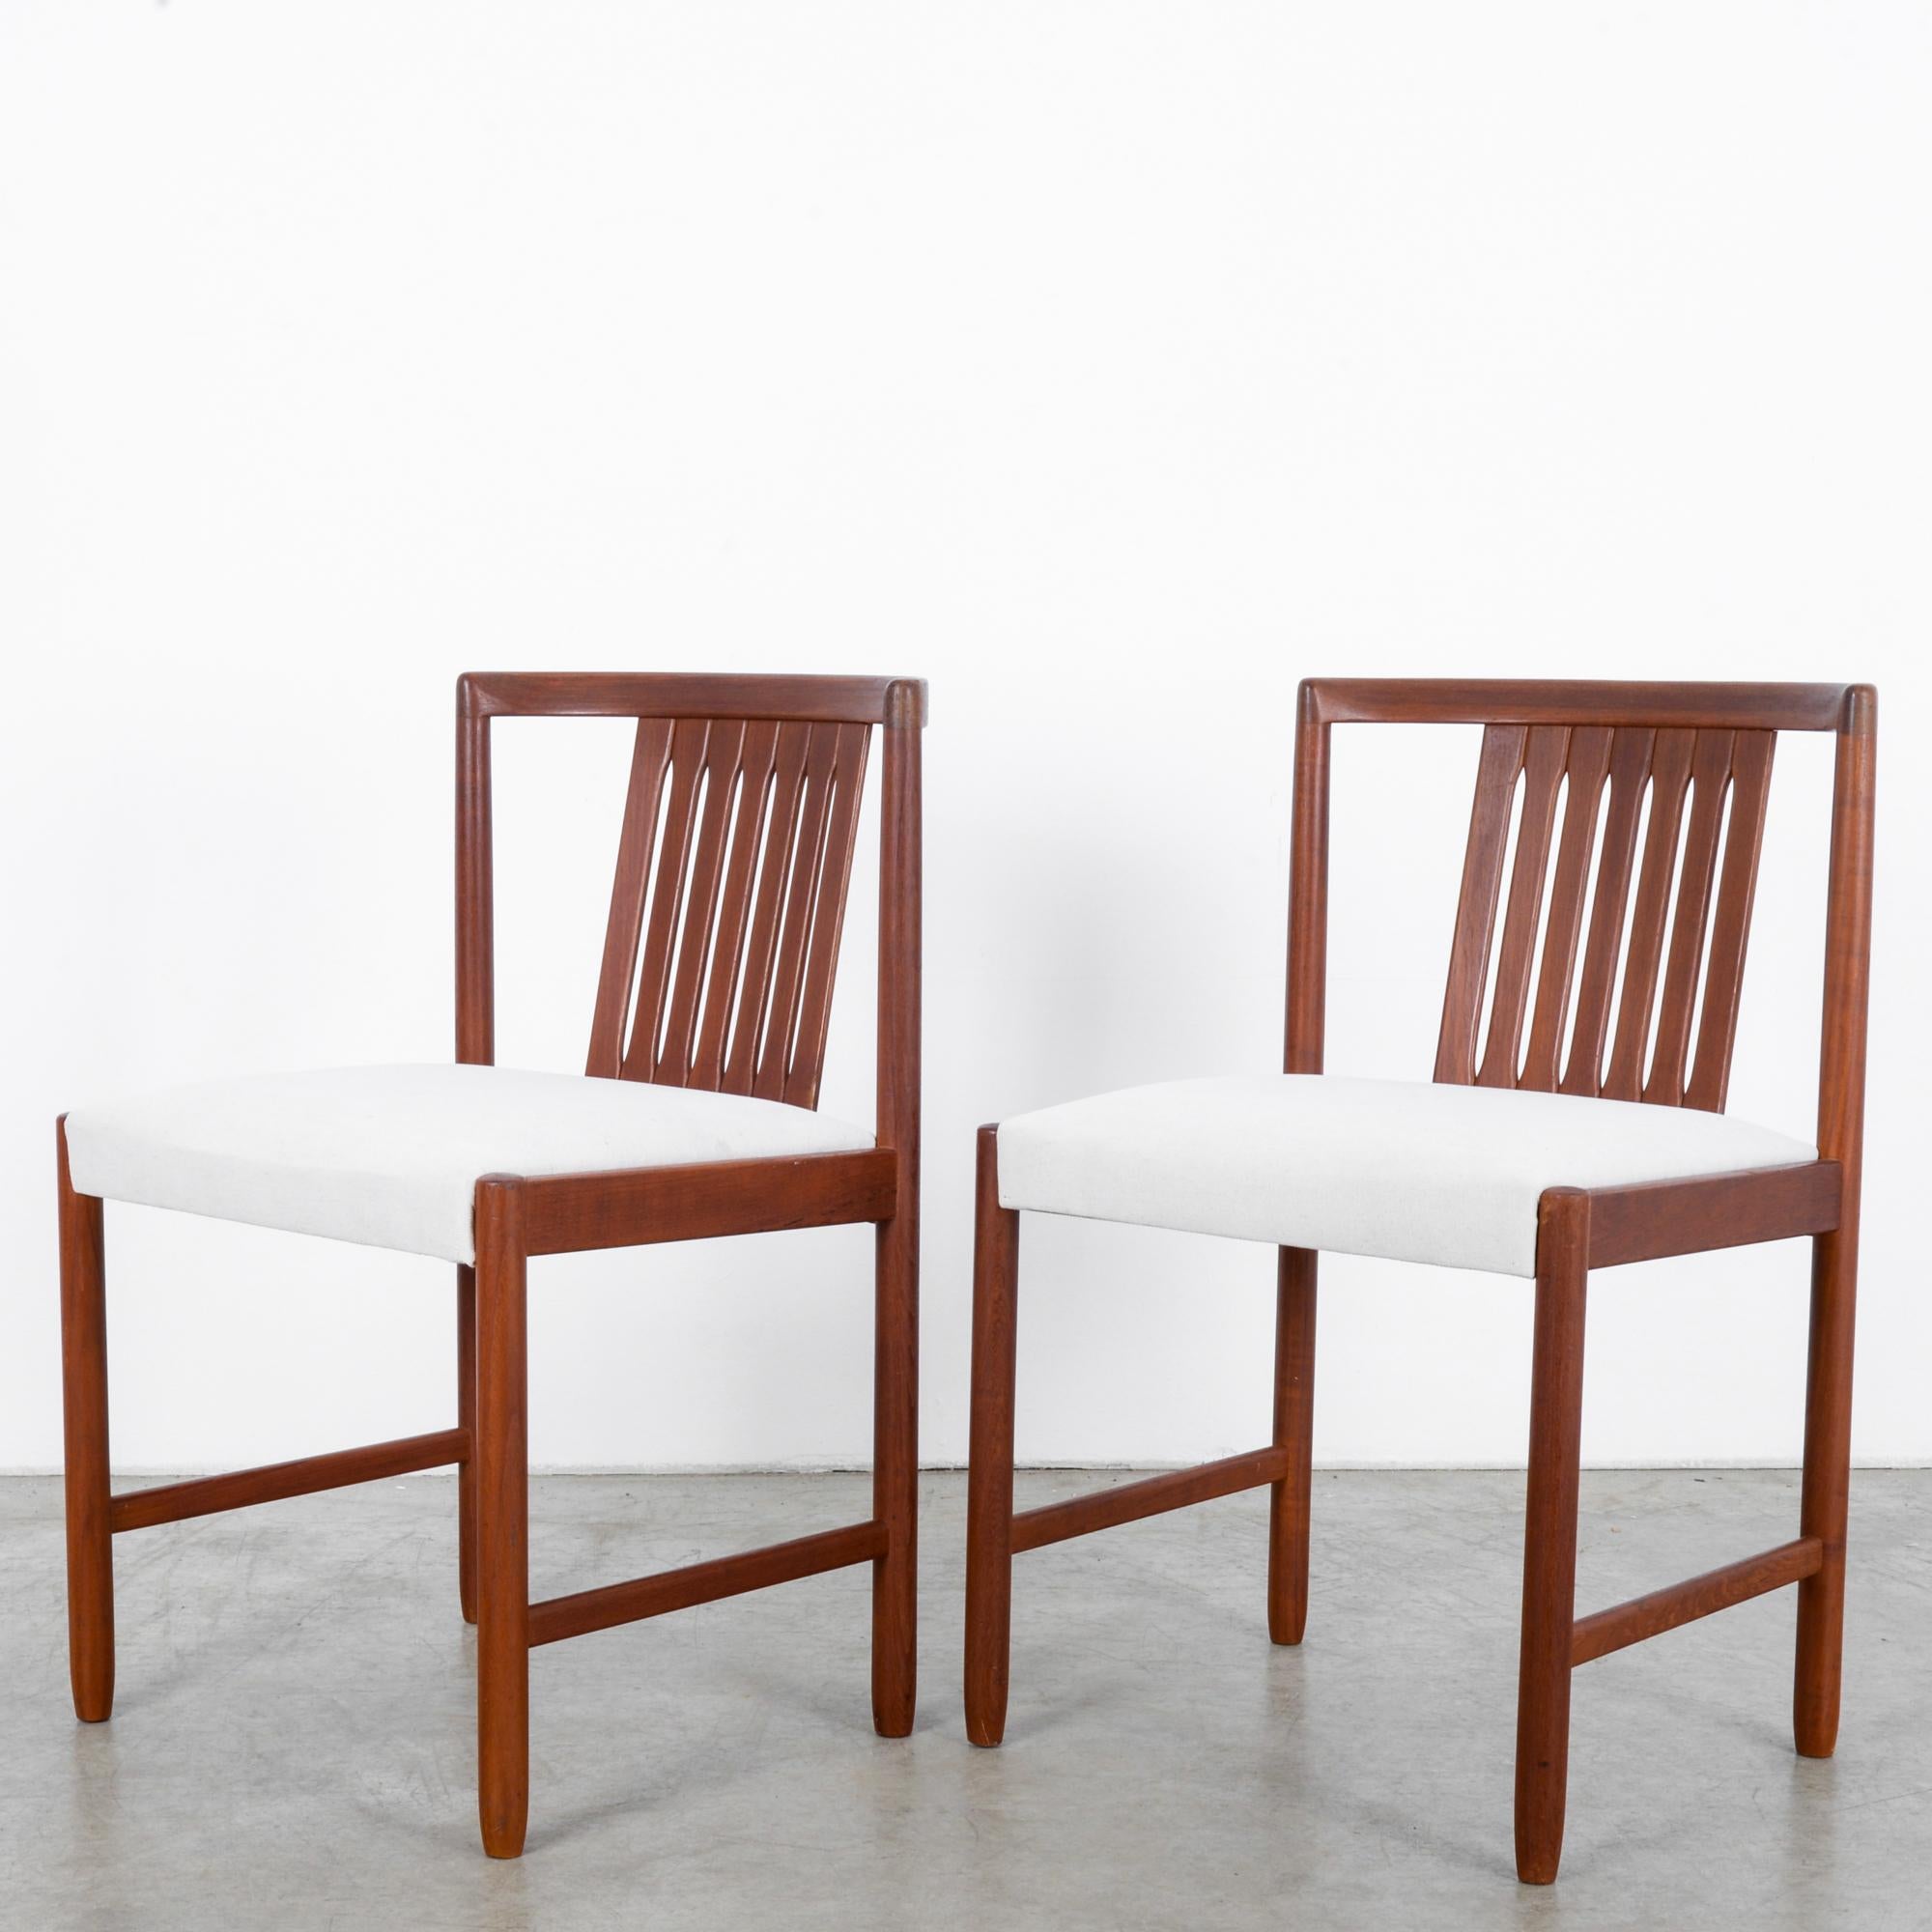 This pair of teak chairs was made in Denmark, circa 1960. From the front, the chairs appear to have an angular structure, and the side profile reveals the curved top rails and angled slats of the back. The ivory white upholstered seats highlight the